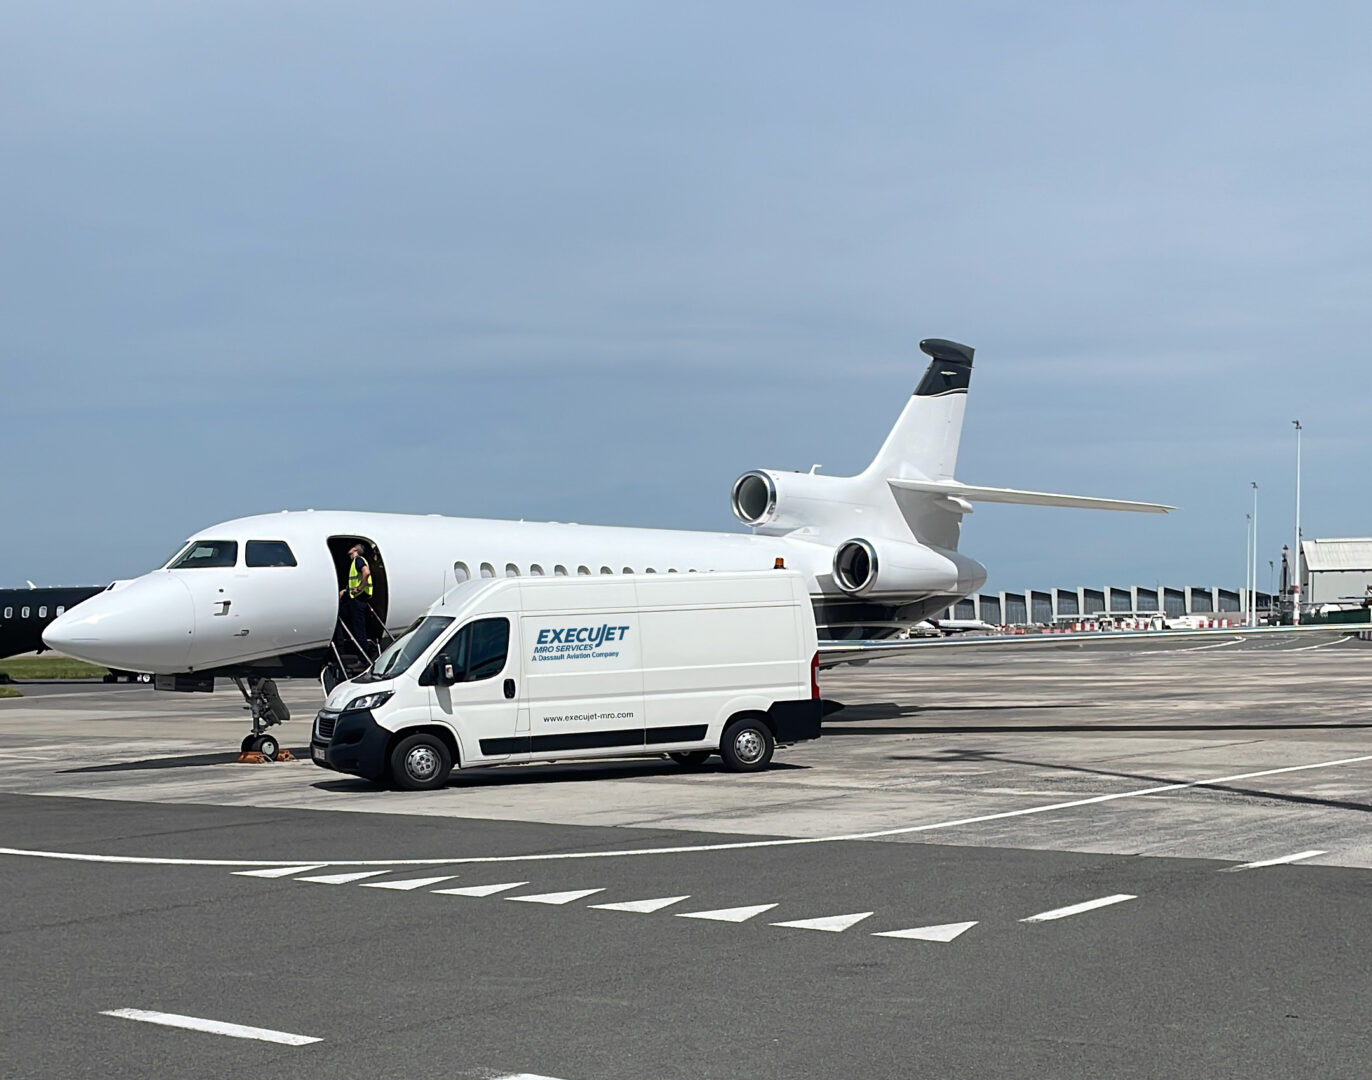 European authorities approve ExecuJet MRO Services to provide line maintenance throughout Europe